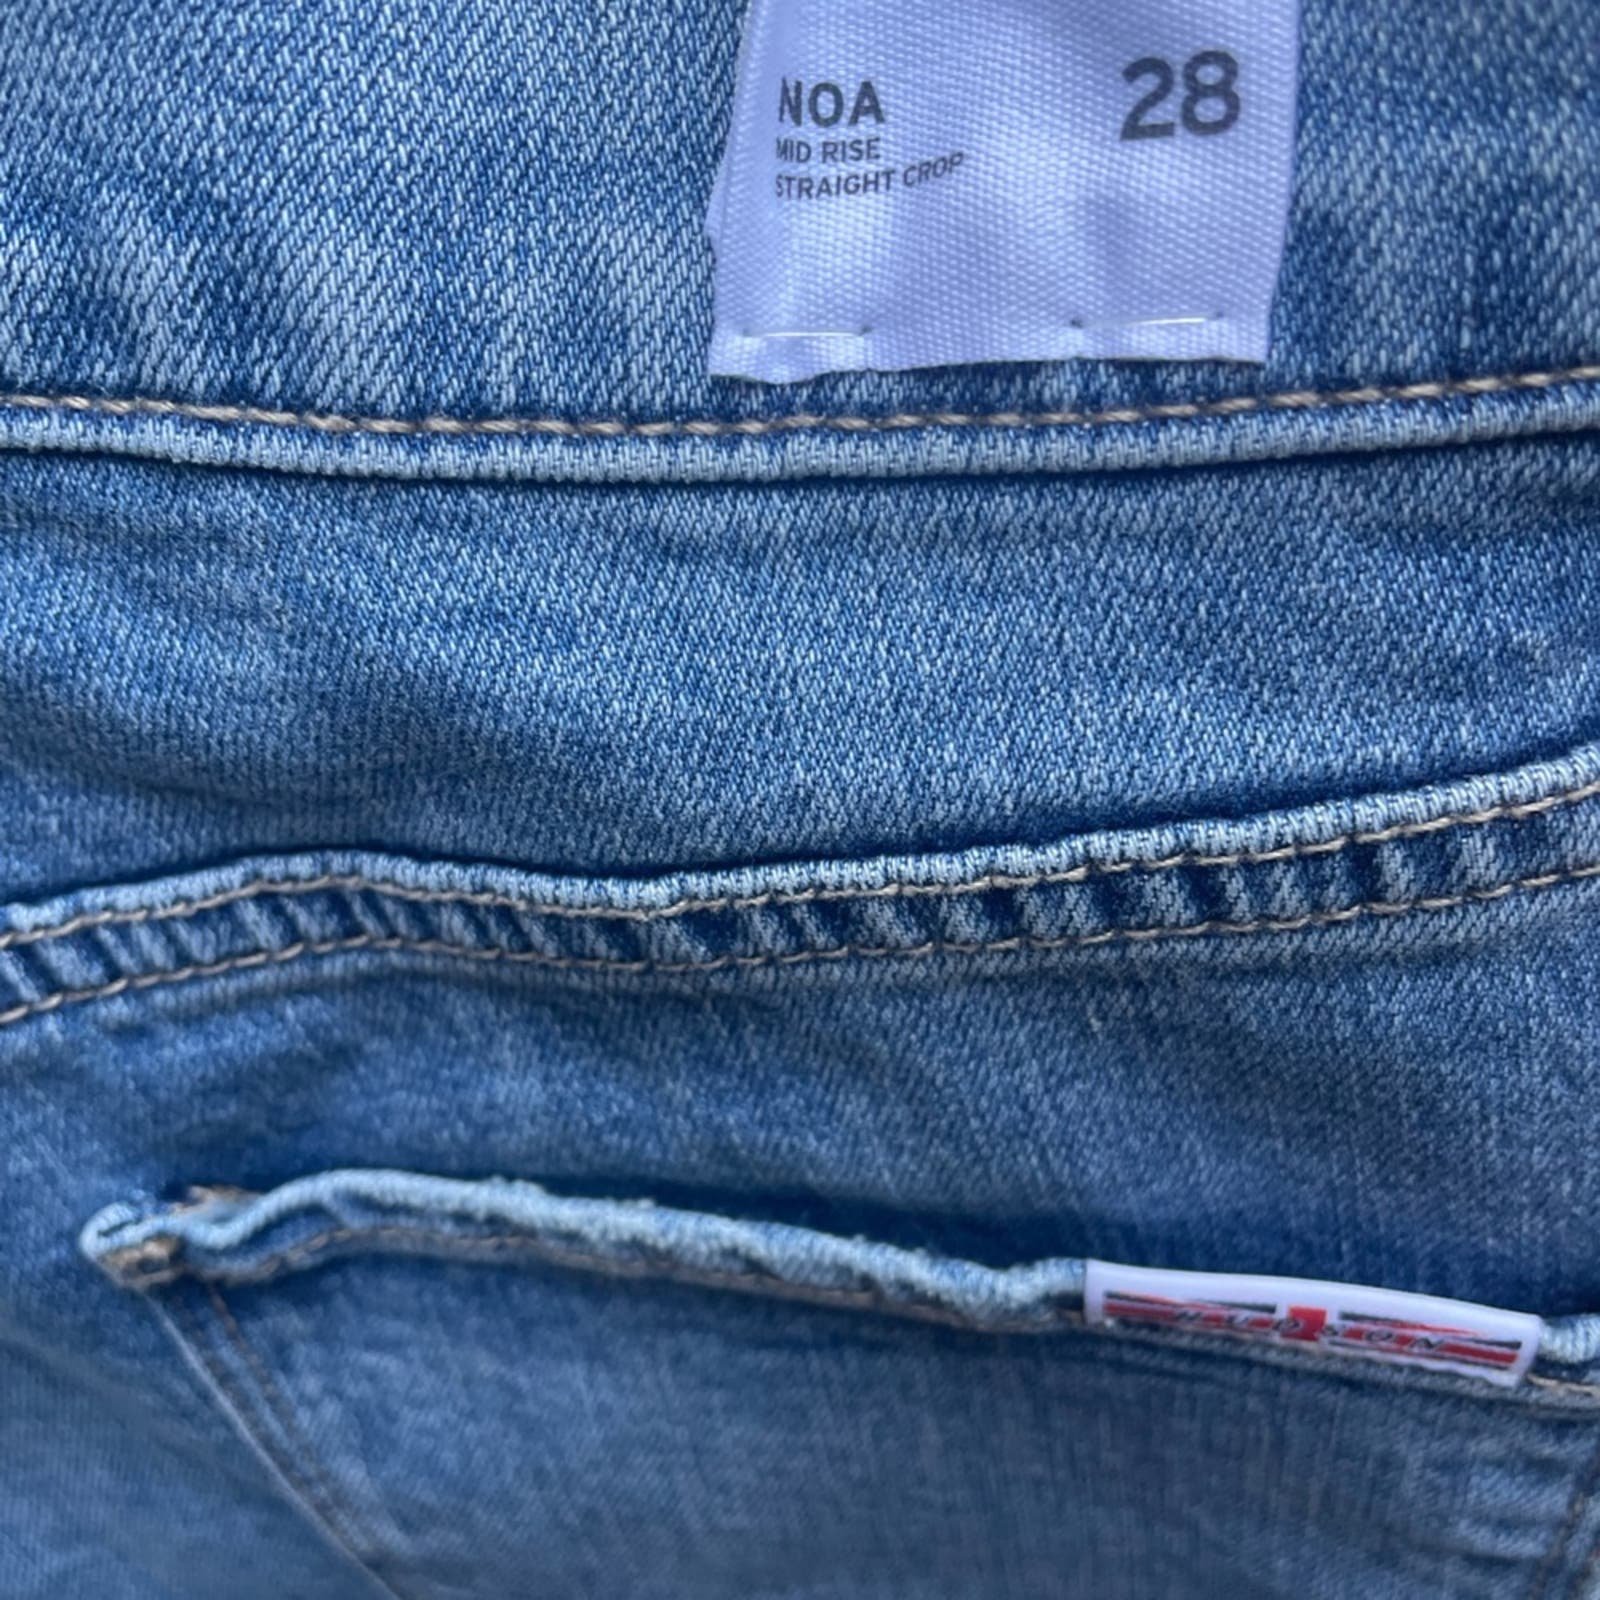 save up to 70% Hudson Jeans Noa Mid-Rise 90’s Baggy Crop Jean Women´s Size 28 gluussmU1 outlet online shop